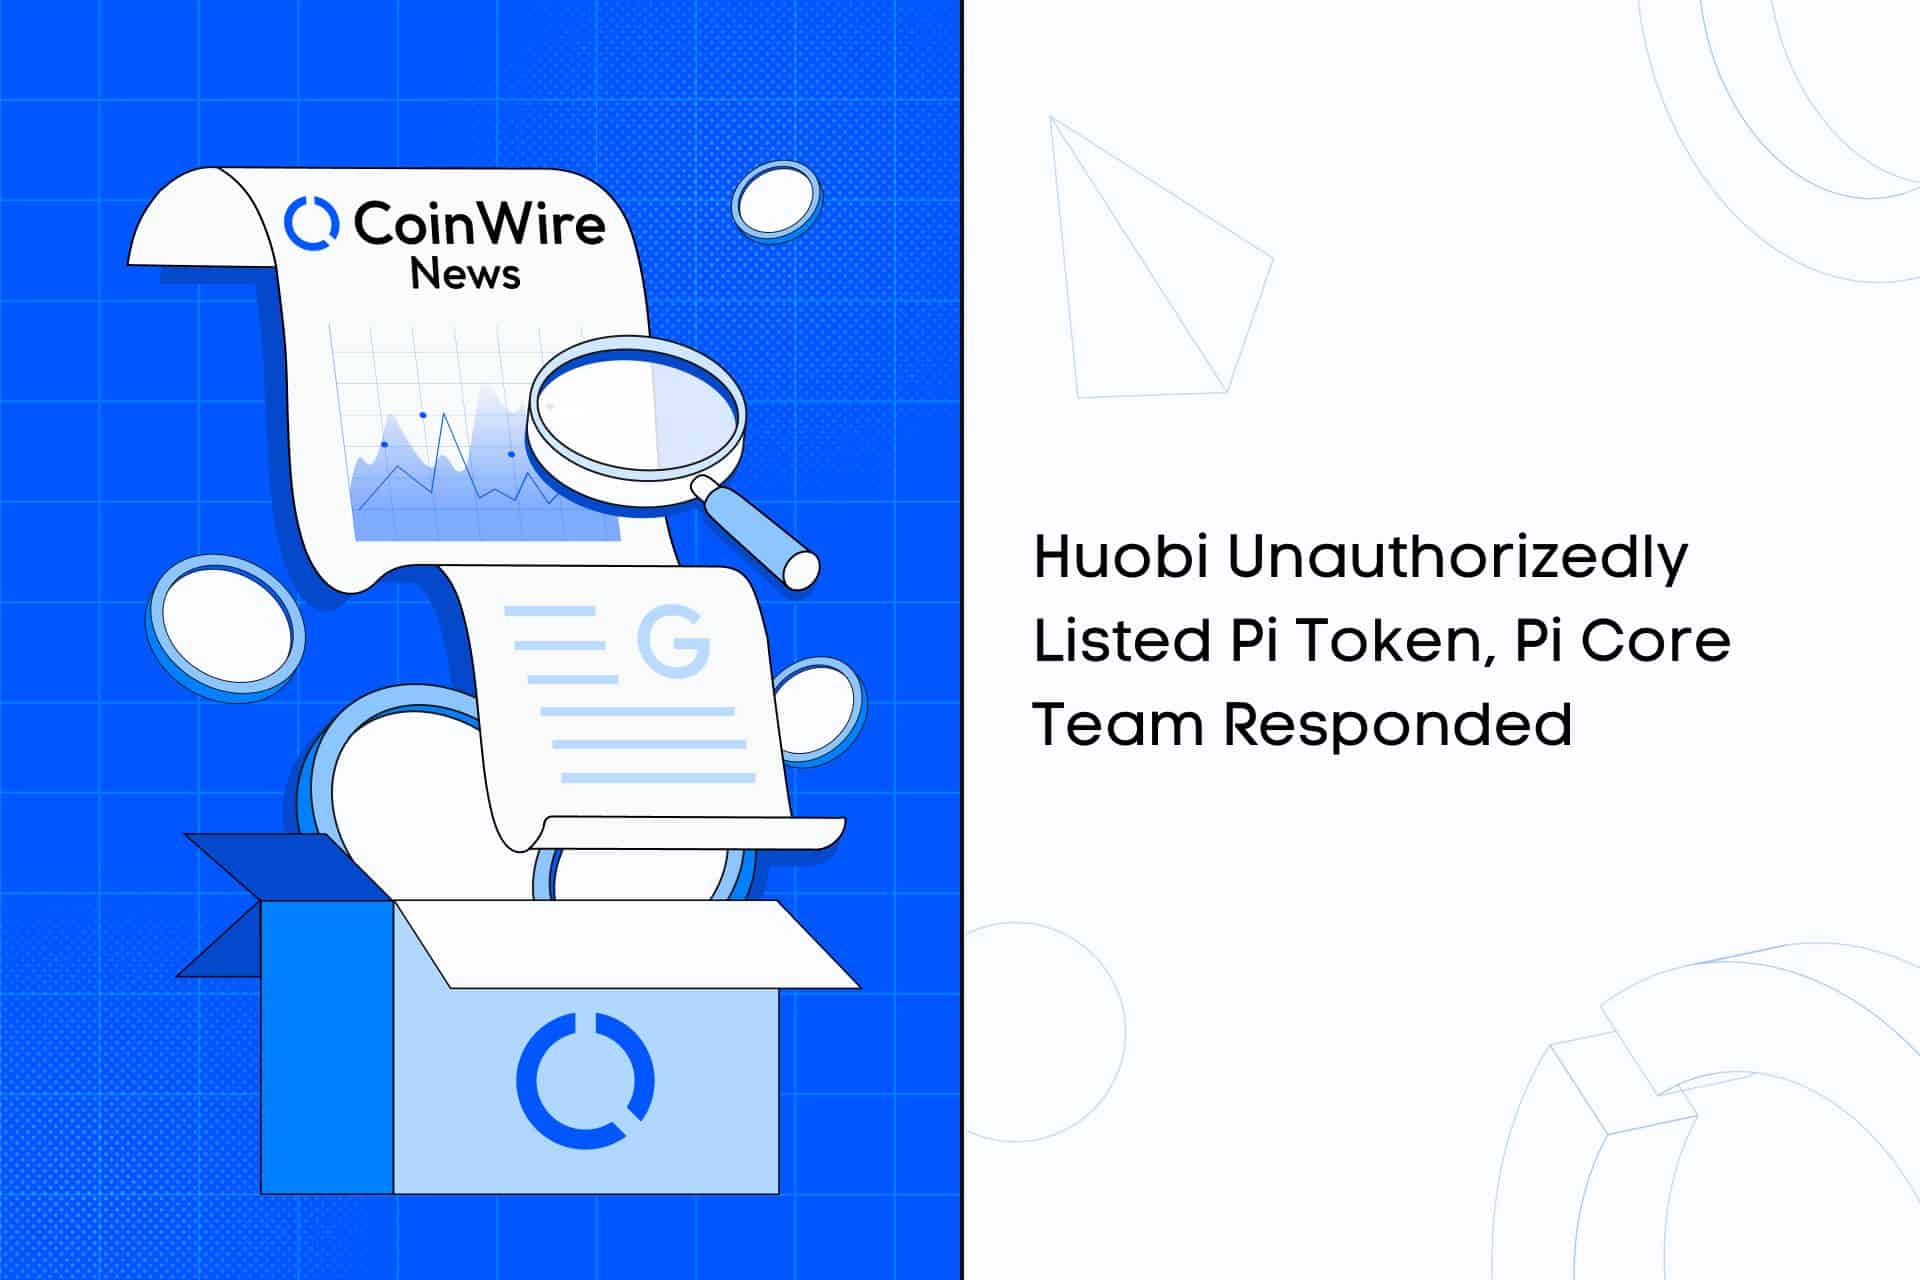 Huobi Unauthorizedly Listed Pi Token, Pi Core Team Responded